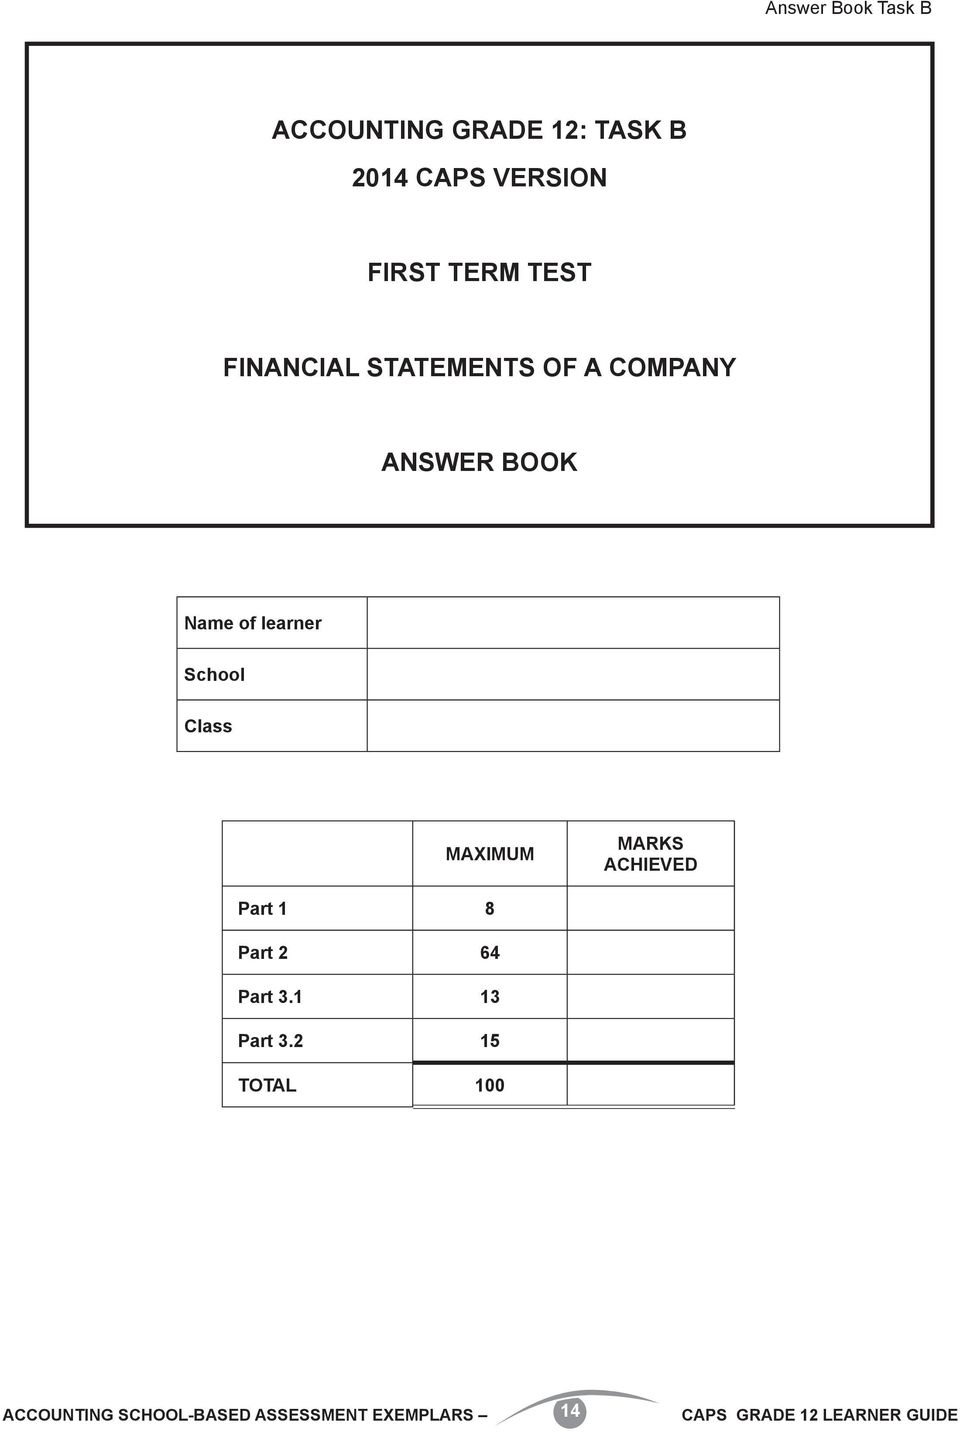 ANSWER BOOK Name of learner School Class MAXIMUM MARKS